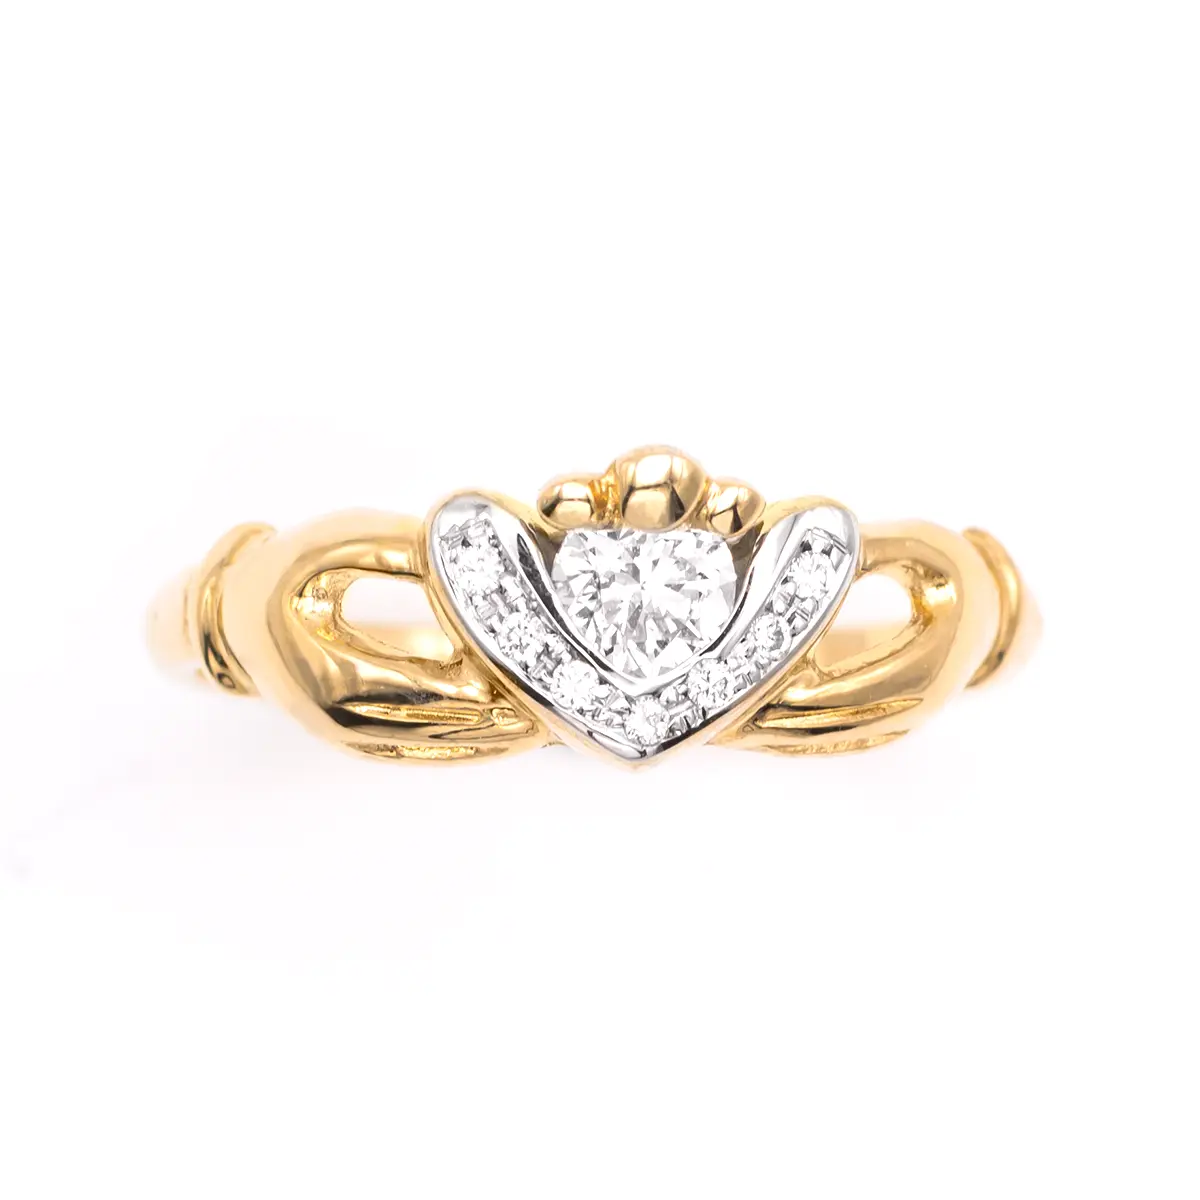 Ladies 14k Gold Claddagh Ring with Diamonds